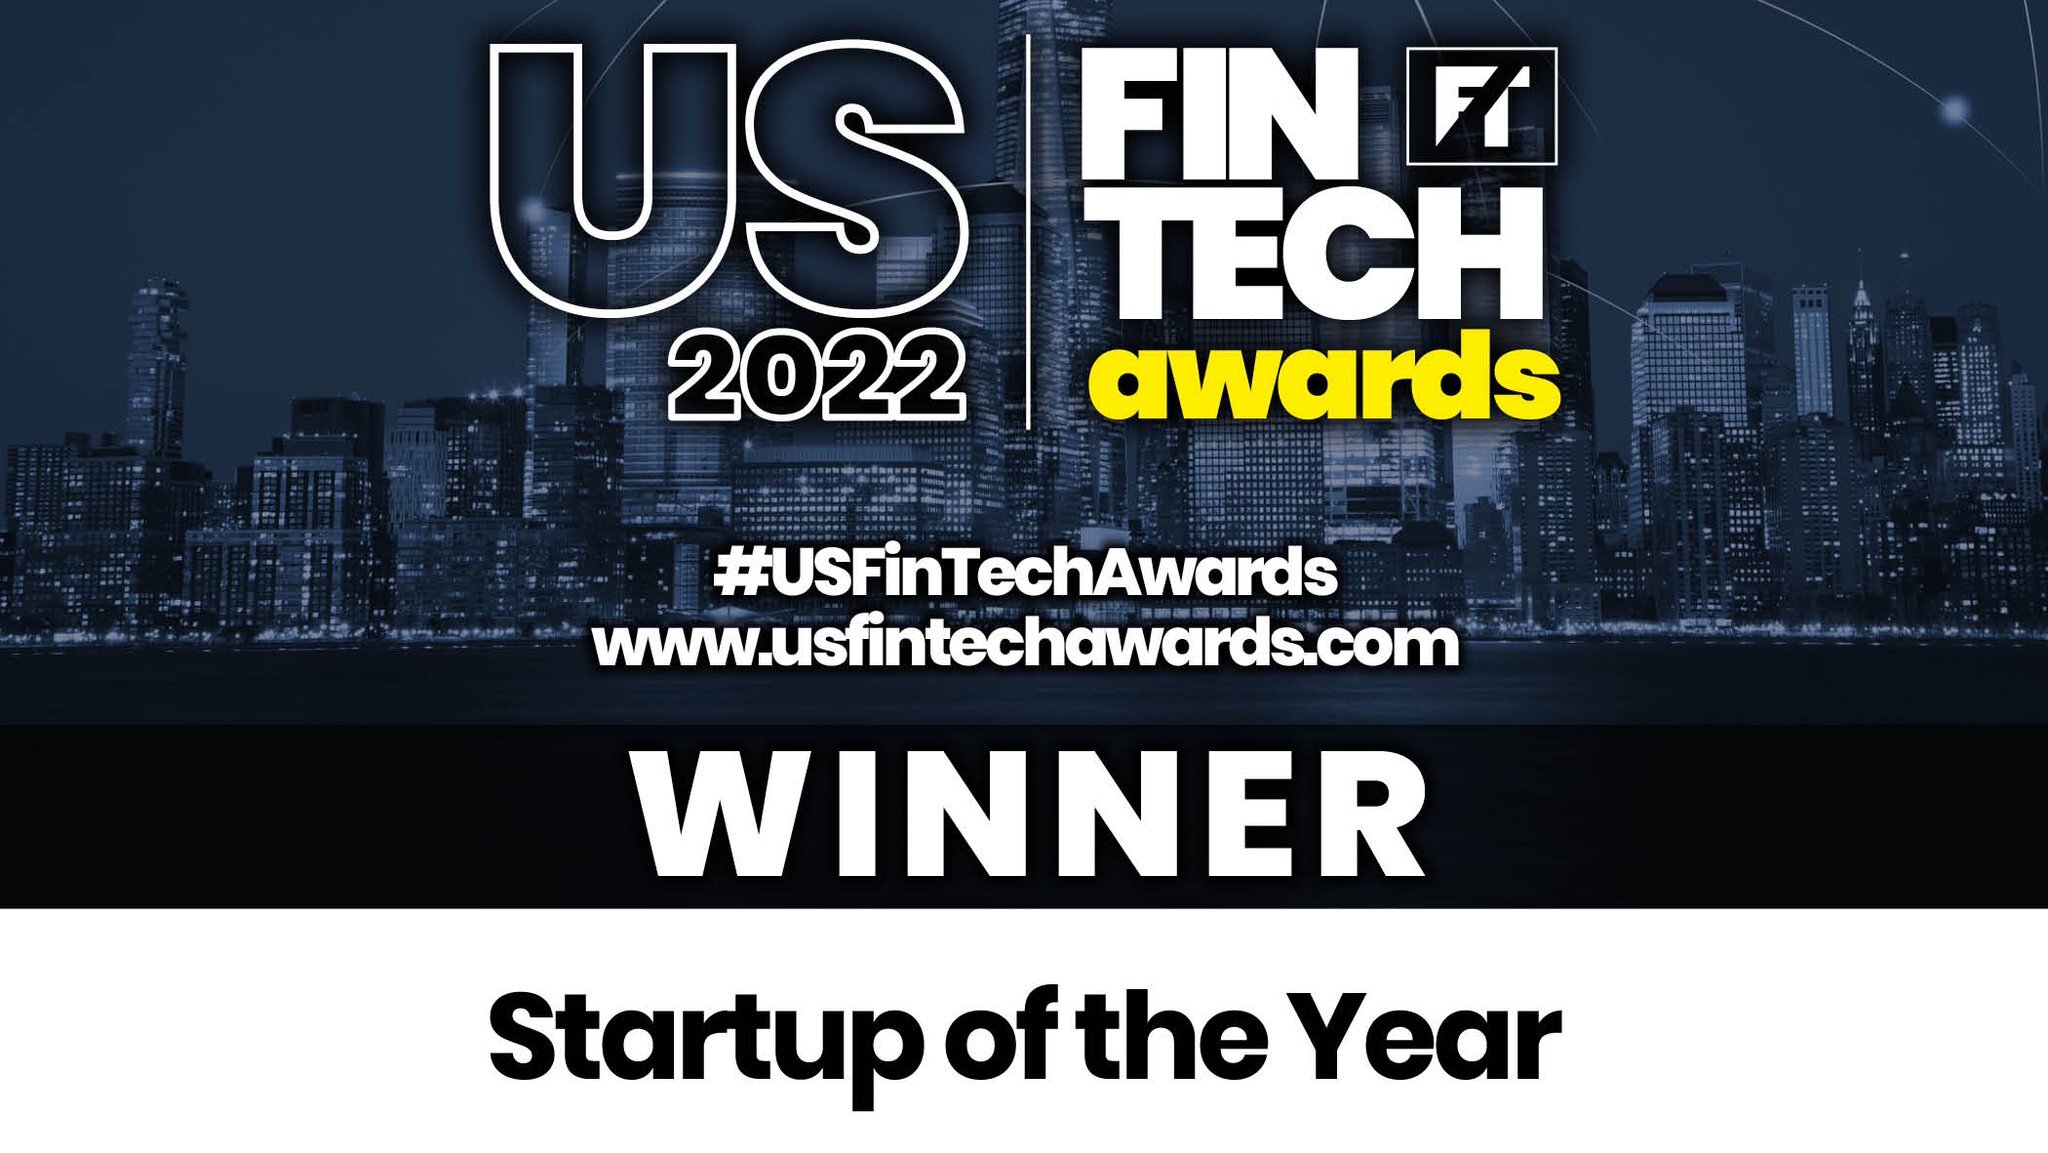 Airwallex named “Startup of the Year” in US FinTech Awards 2022